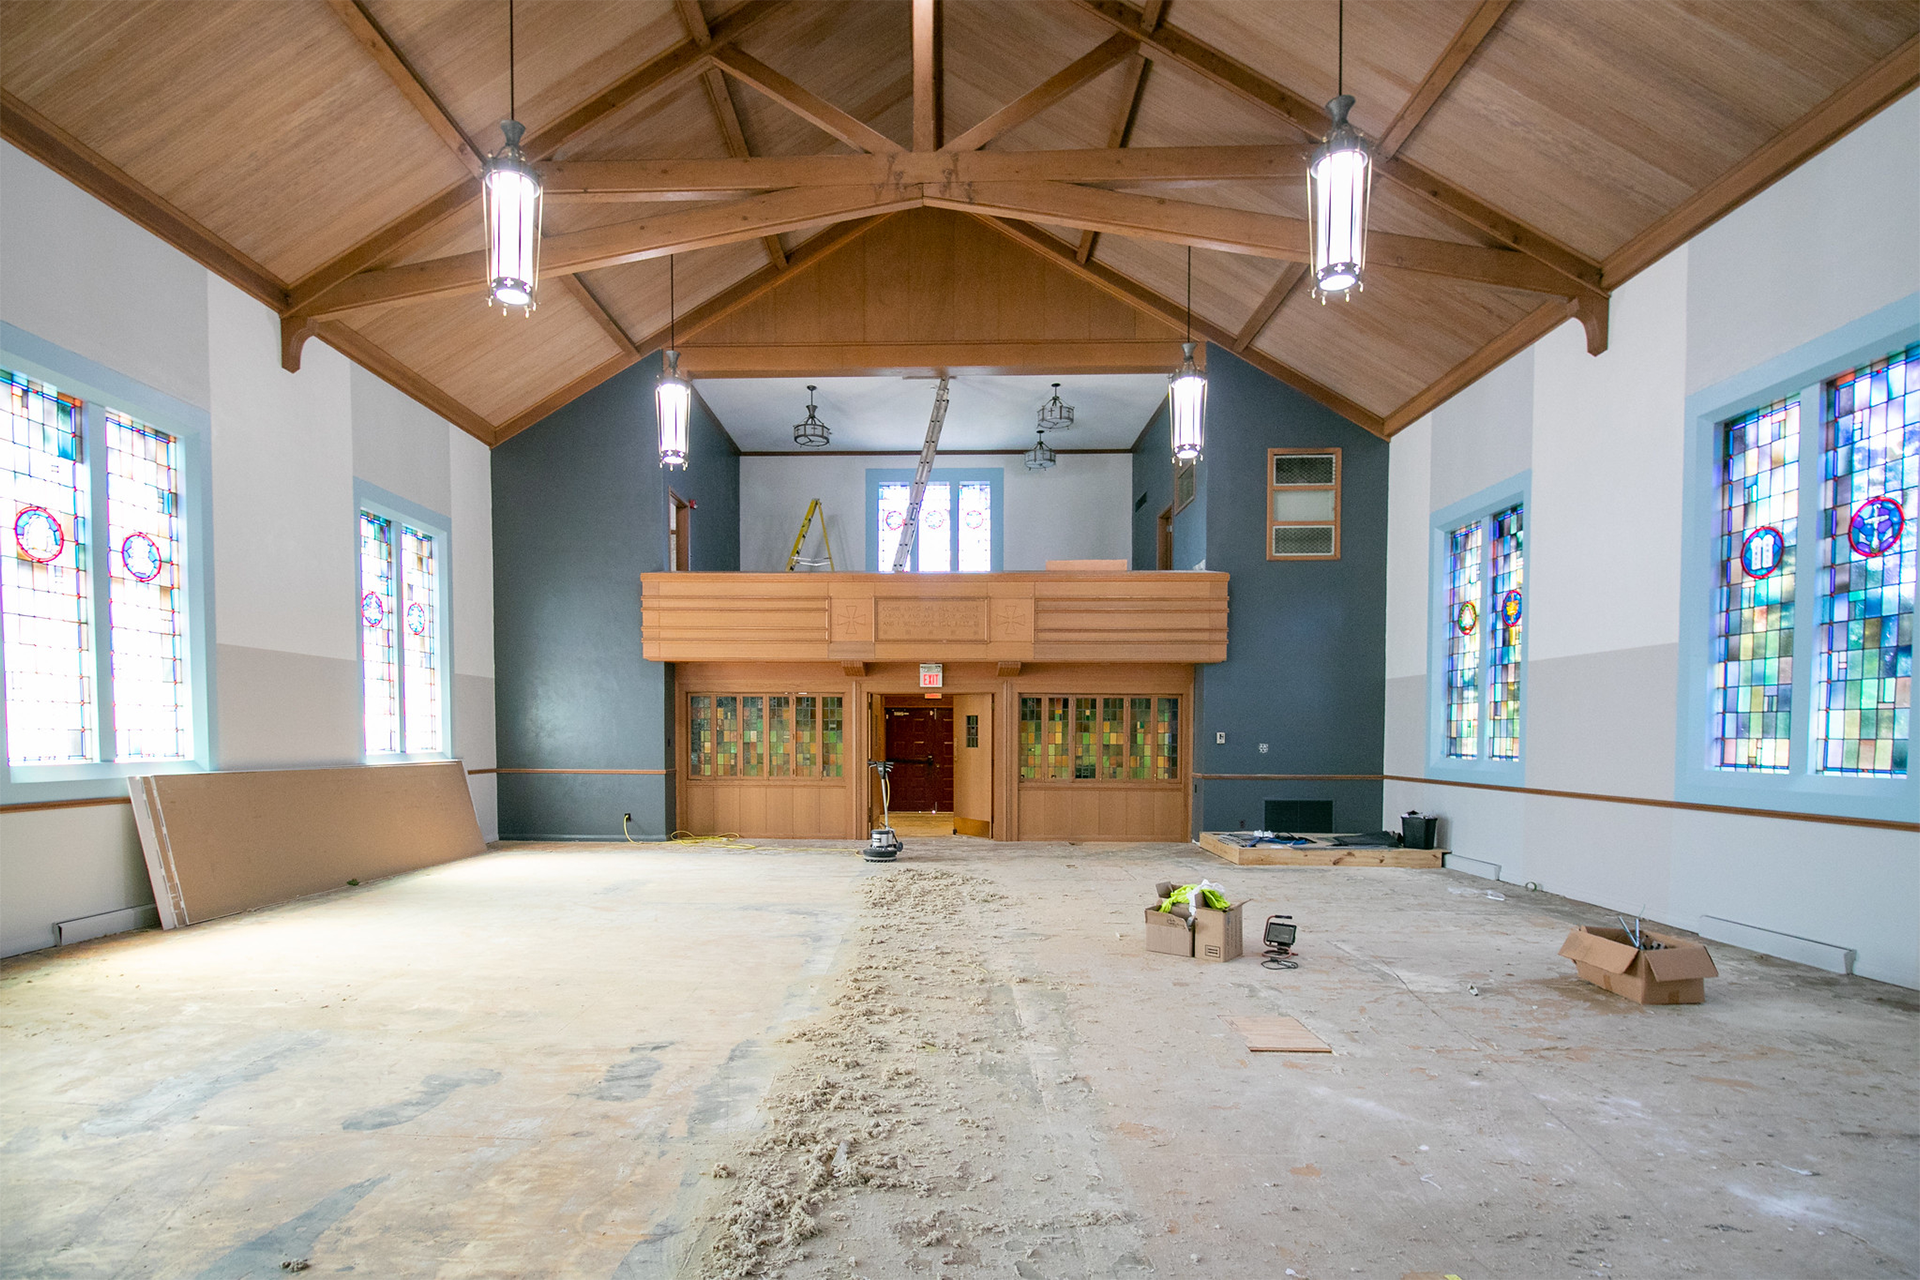 An empty church with stained glass windows and wooden beams